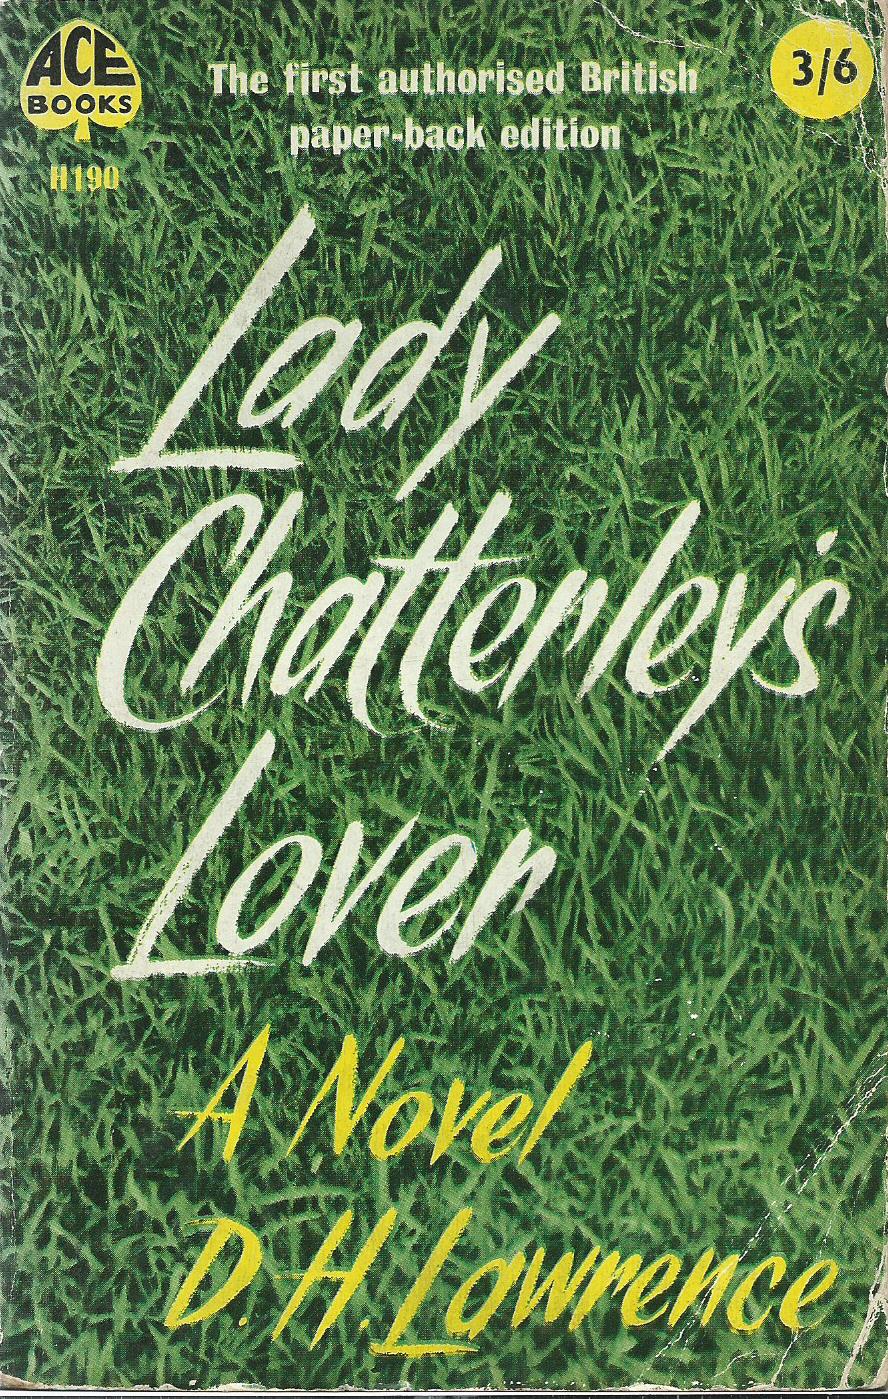 lady-chatterleys-lover-from-1959